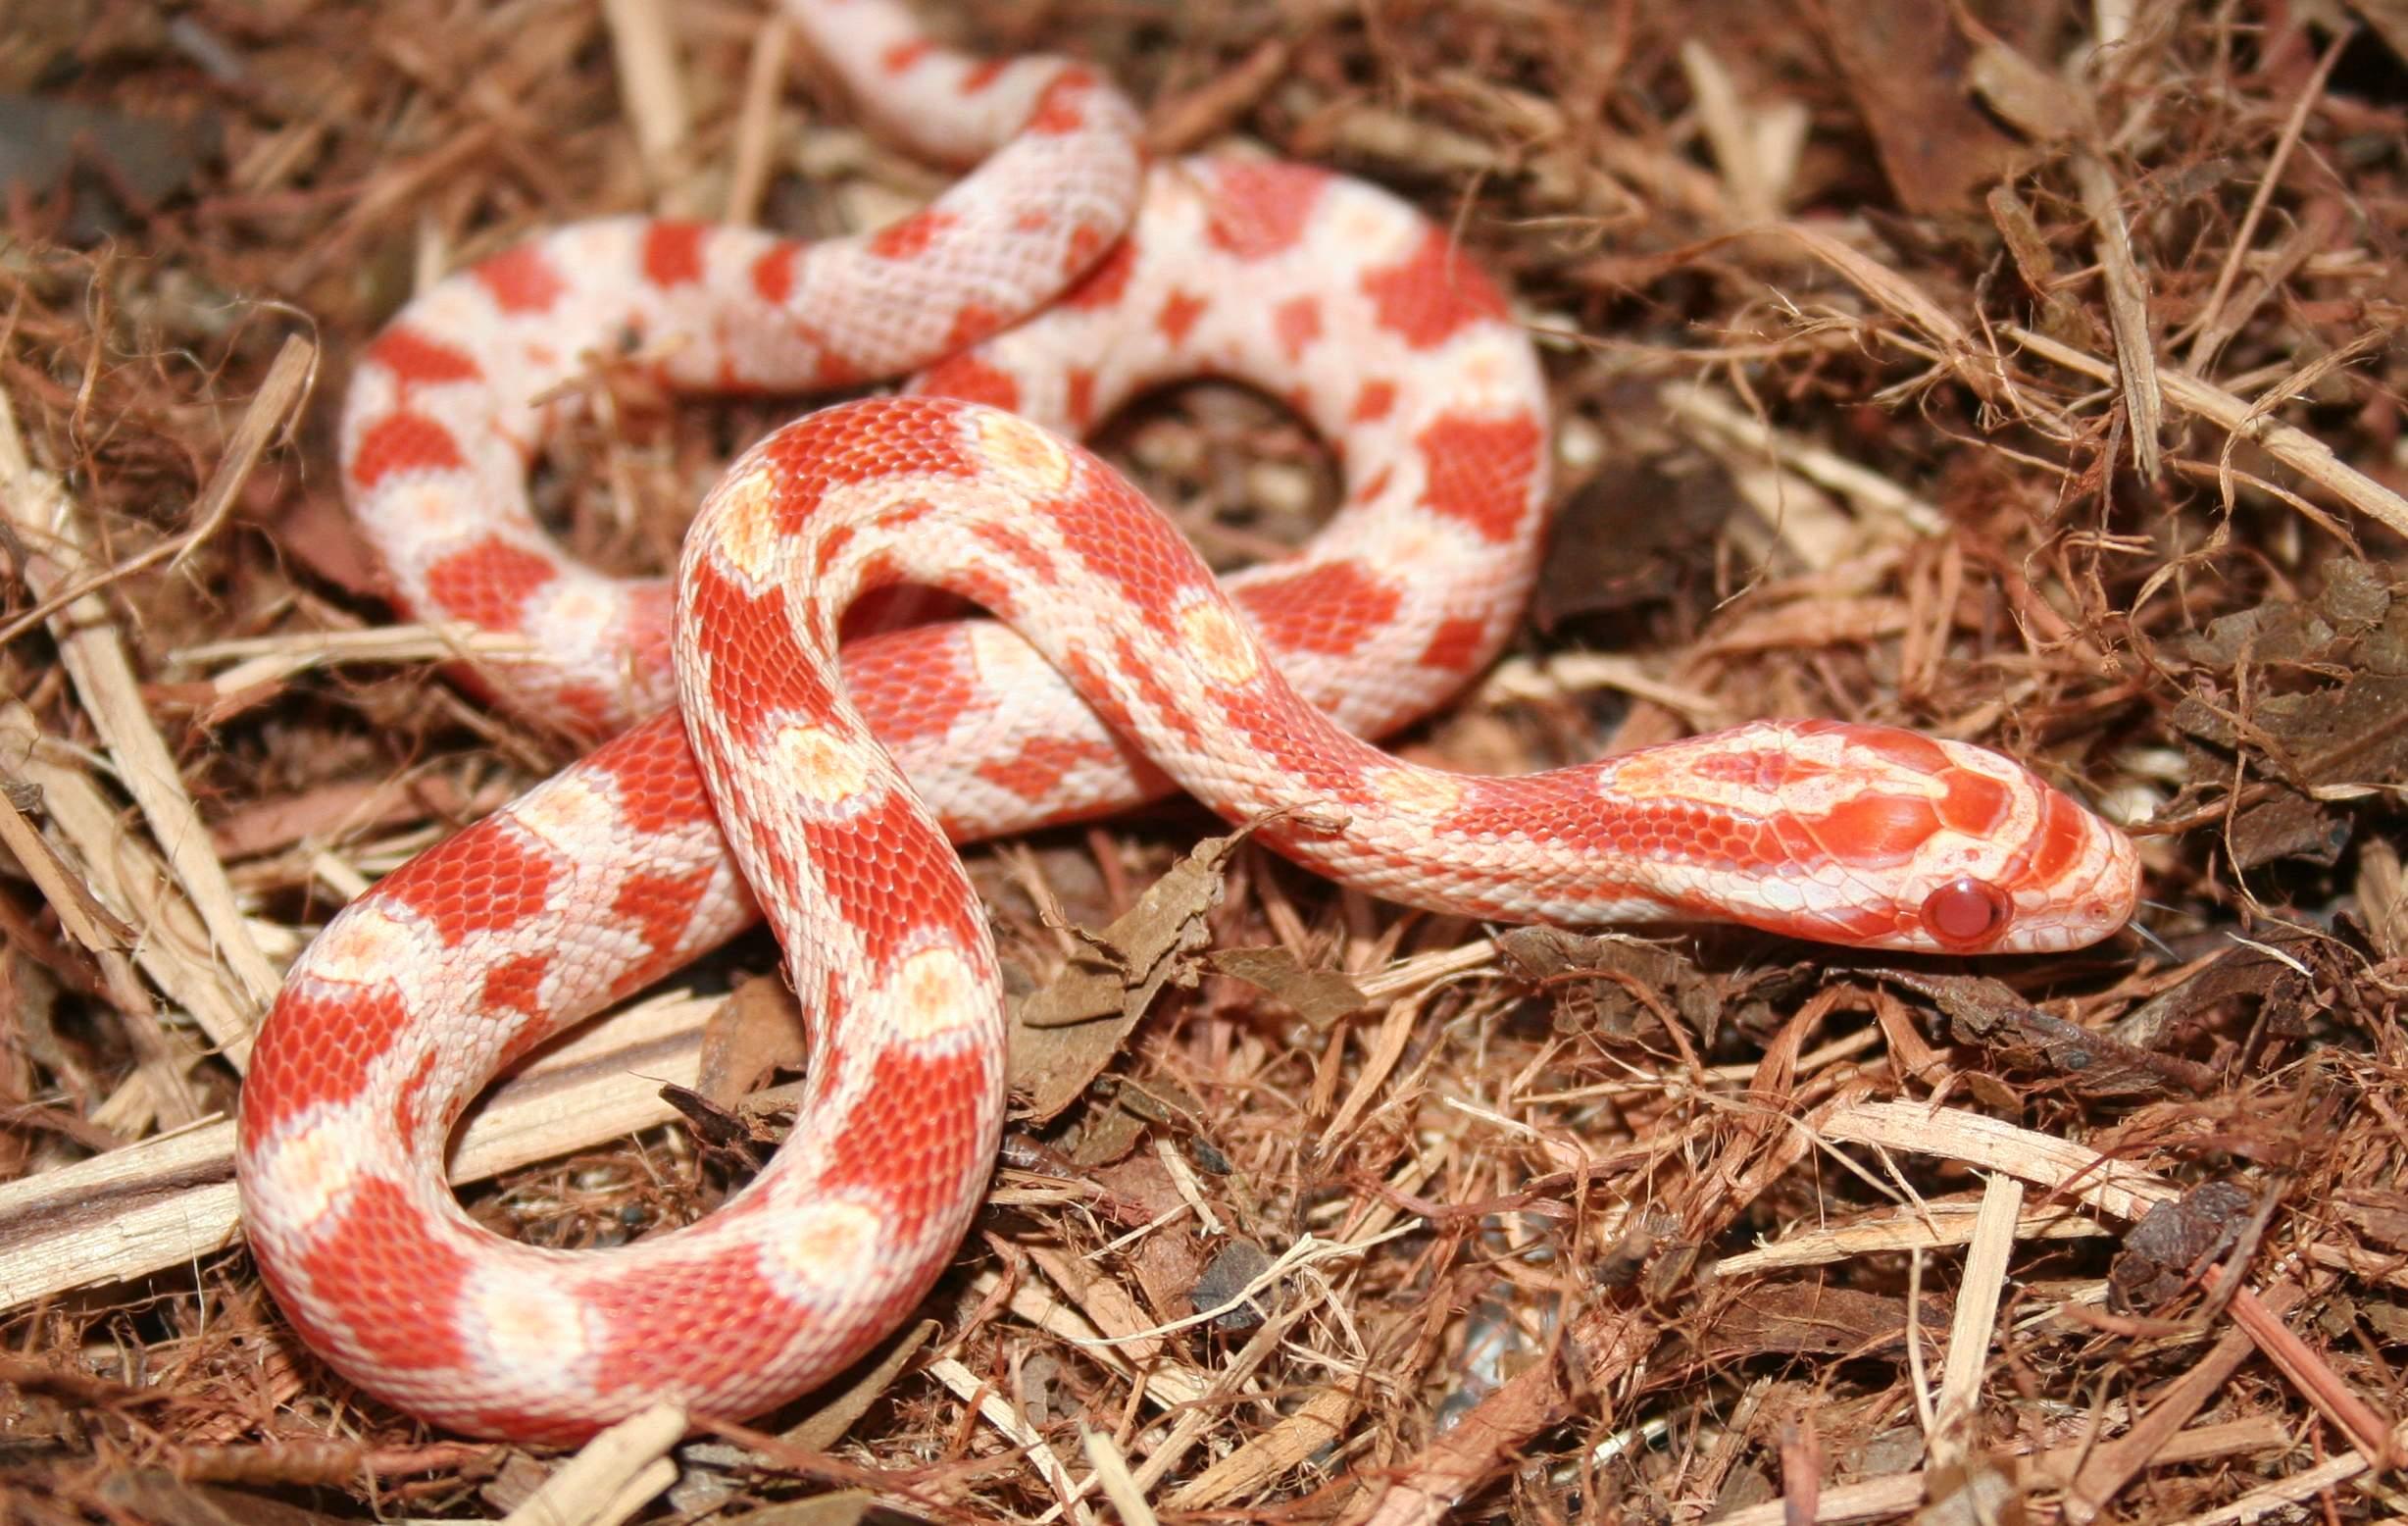 HD wallpaper of a corn snake curled up on a bed of wood chips.